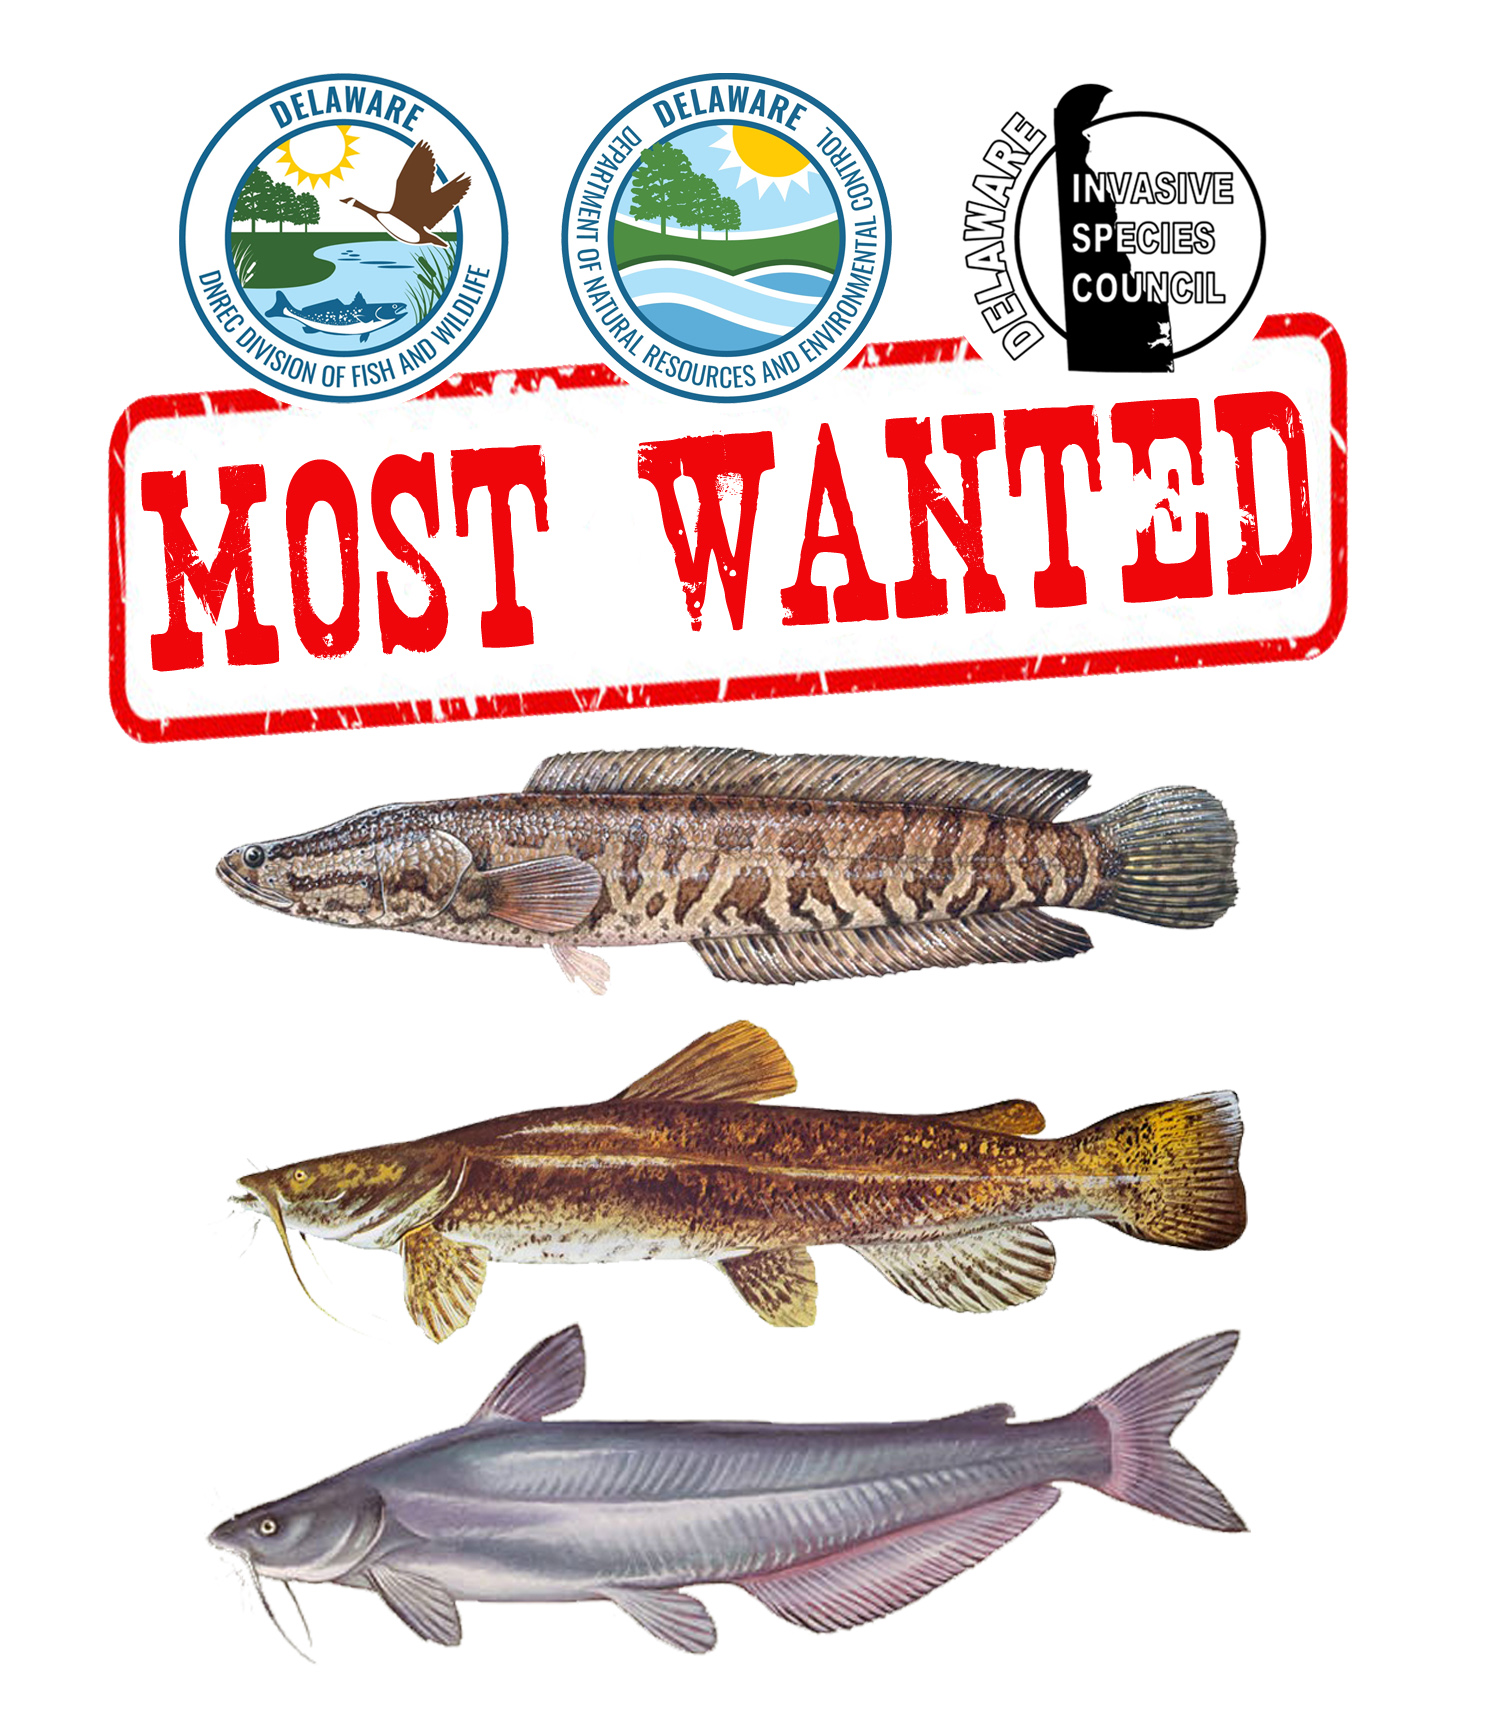 A composite graphic showing images of fish considered to be invasive species with the words Most Wanted above them.